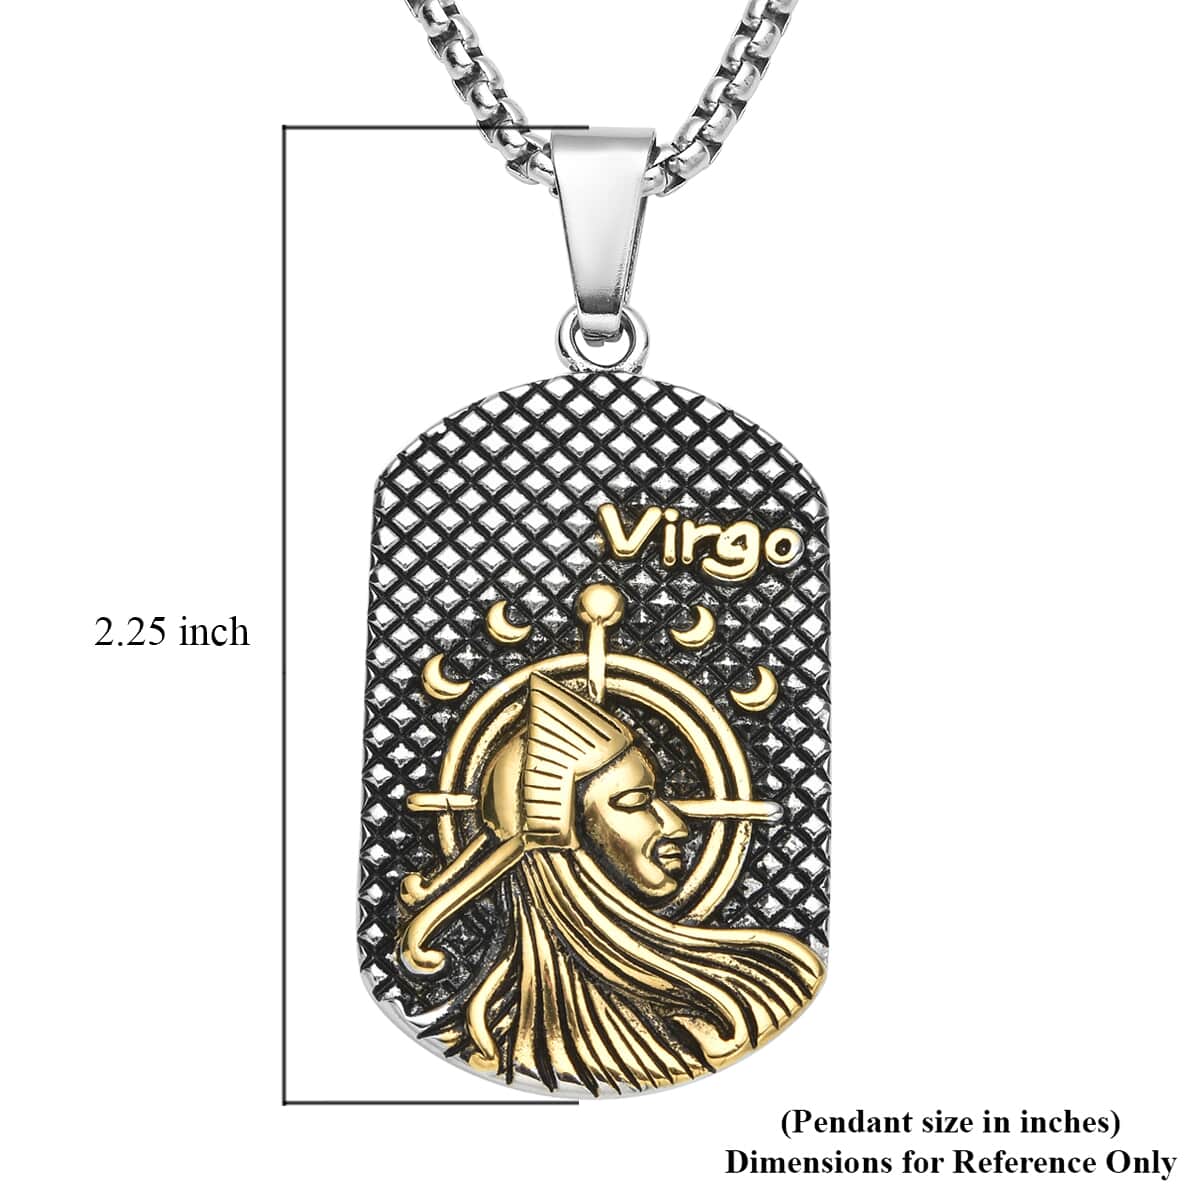 Virgo Dog Tag Jewelry Gift Box Pendant Necklace 23.5 Inches in ION Plated YG and Black Oxidized Stainless Steel image number 4